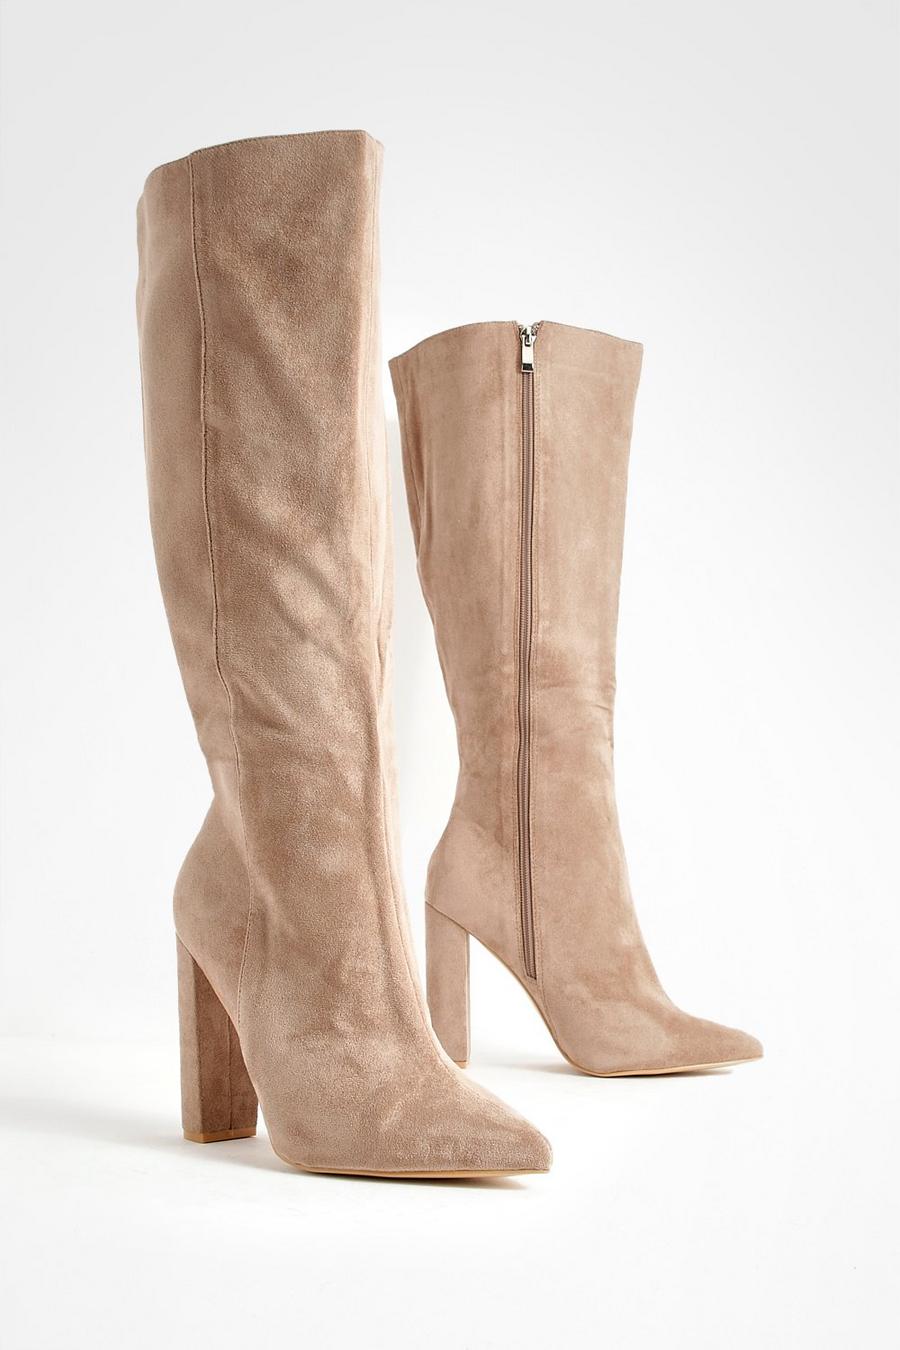 Mocha Wide Width Pointed Knee High Heeled Boots